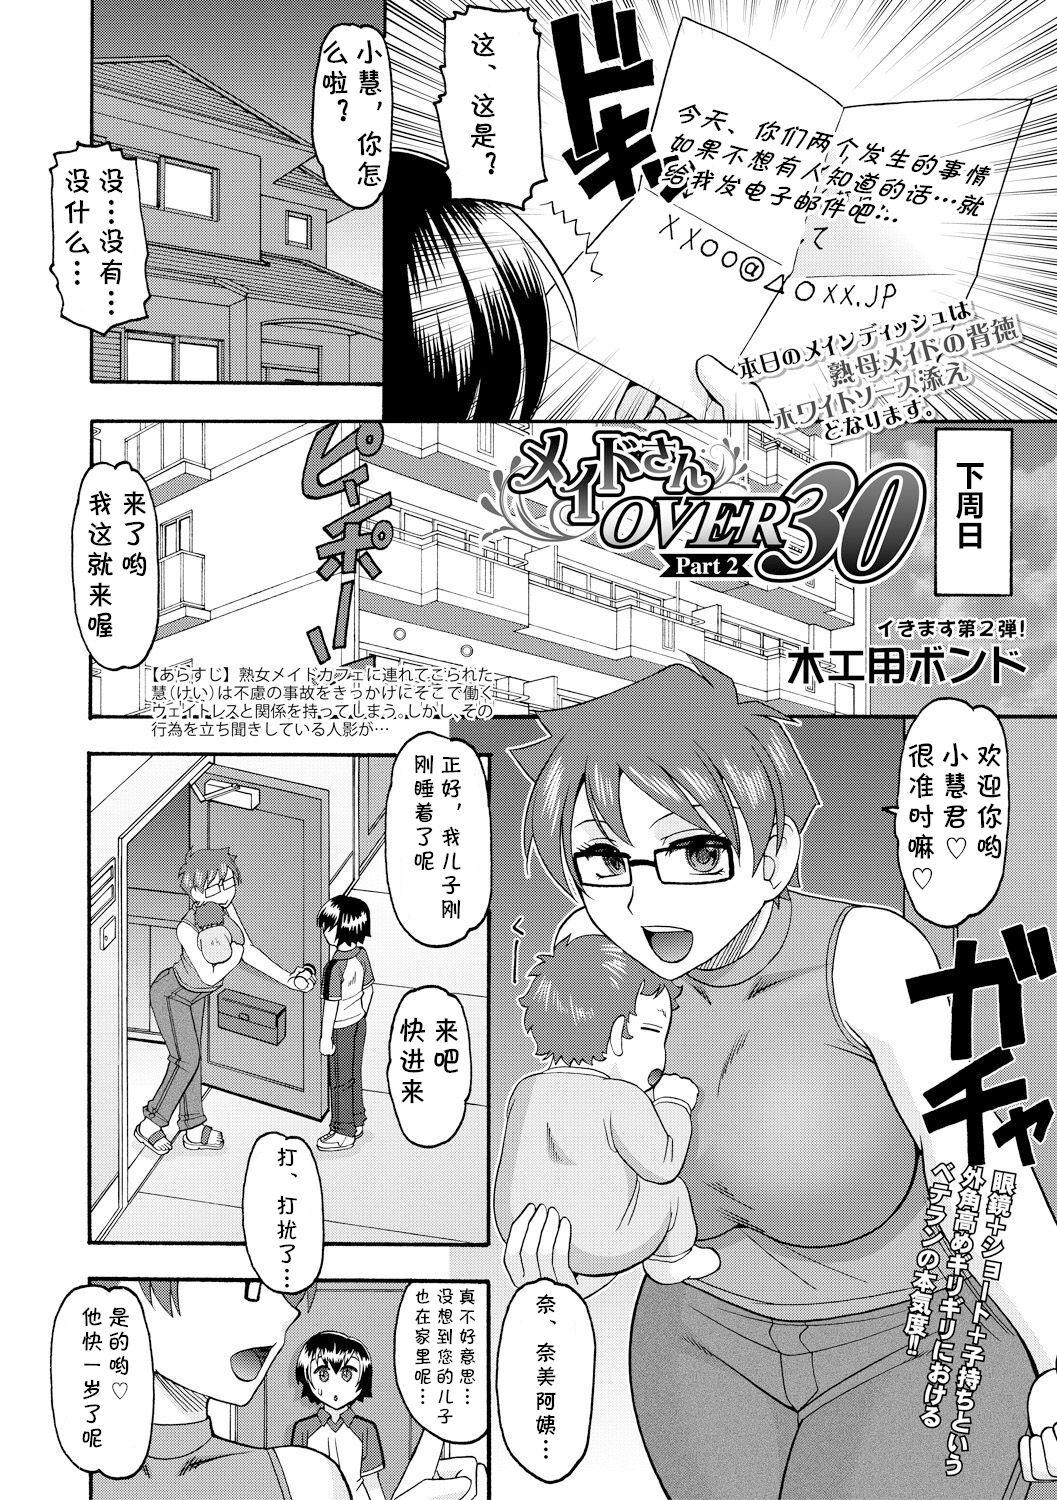 Guy Maid-san OVER 30 Part 2 Fucking - Page 2